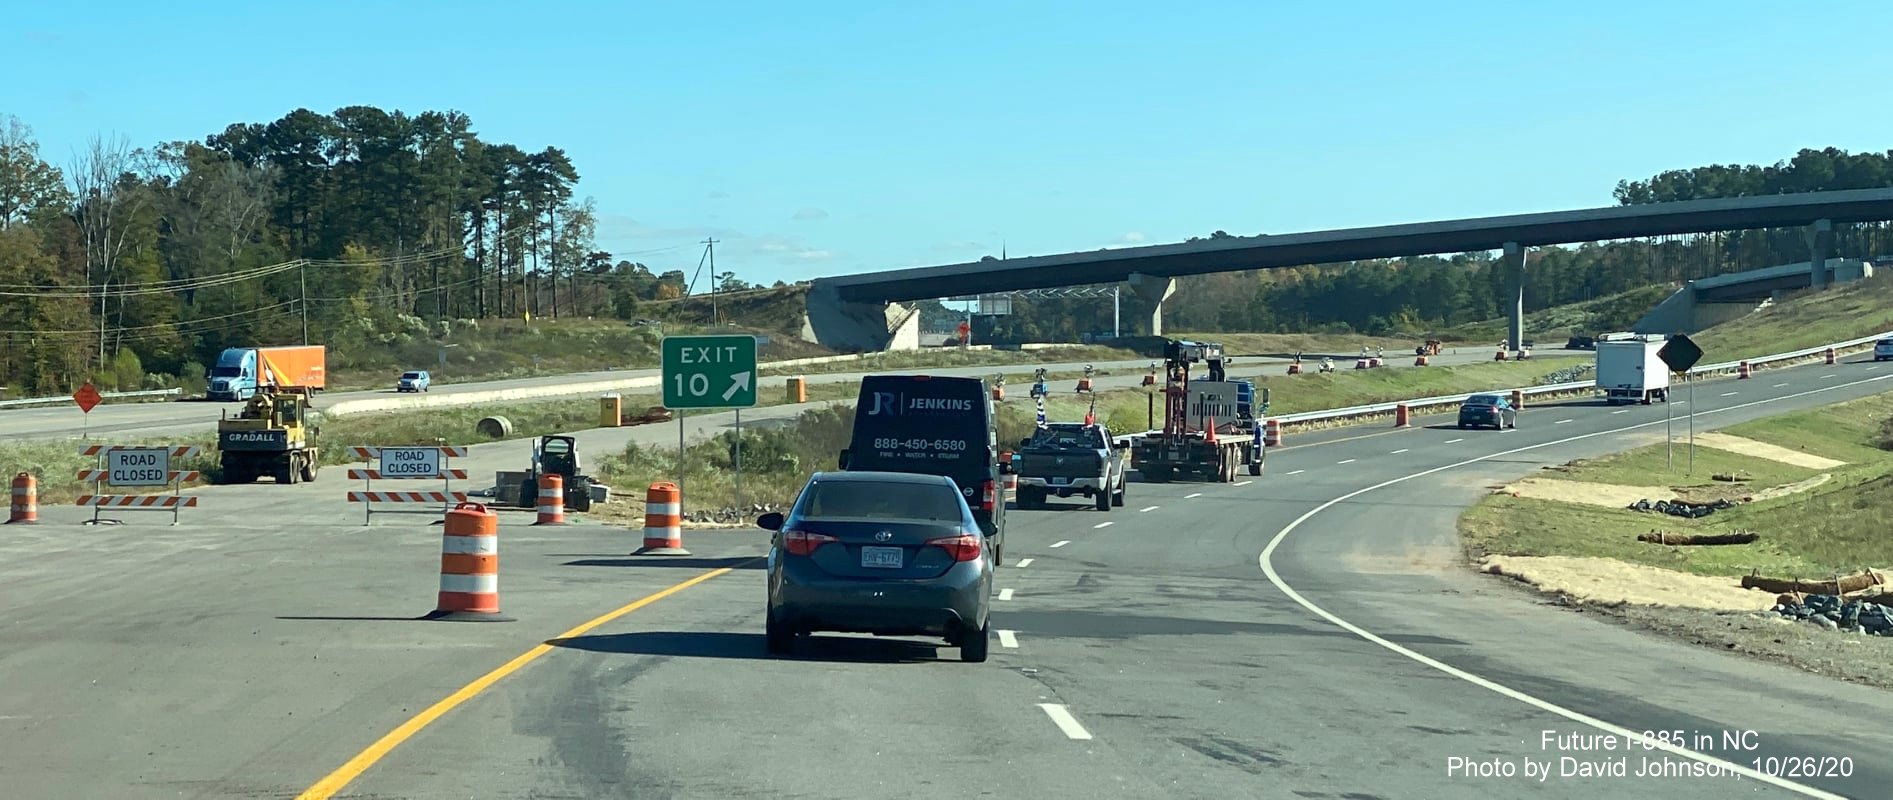 Image of traffic on US 70 East now using exit ramp from Future I-885 South East End Connector in Durham, by David Johnson October 2020